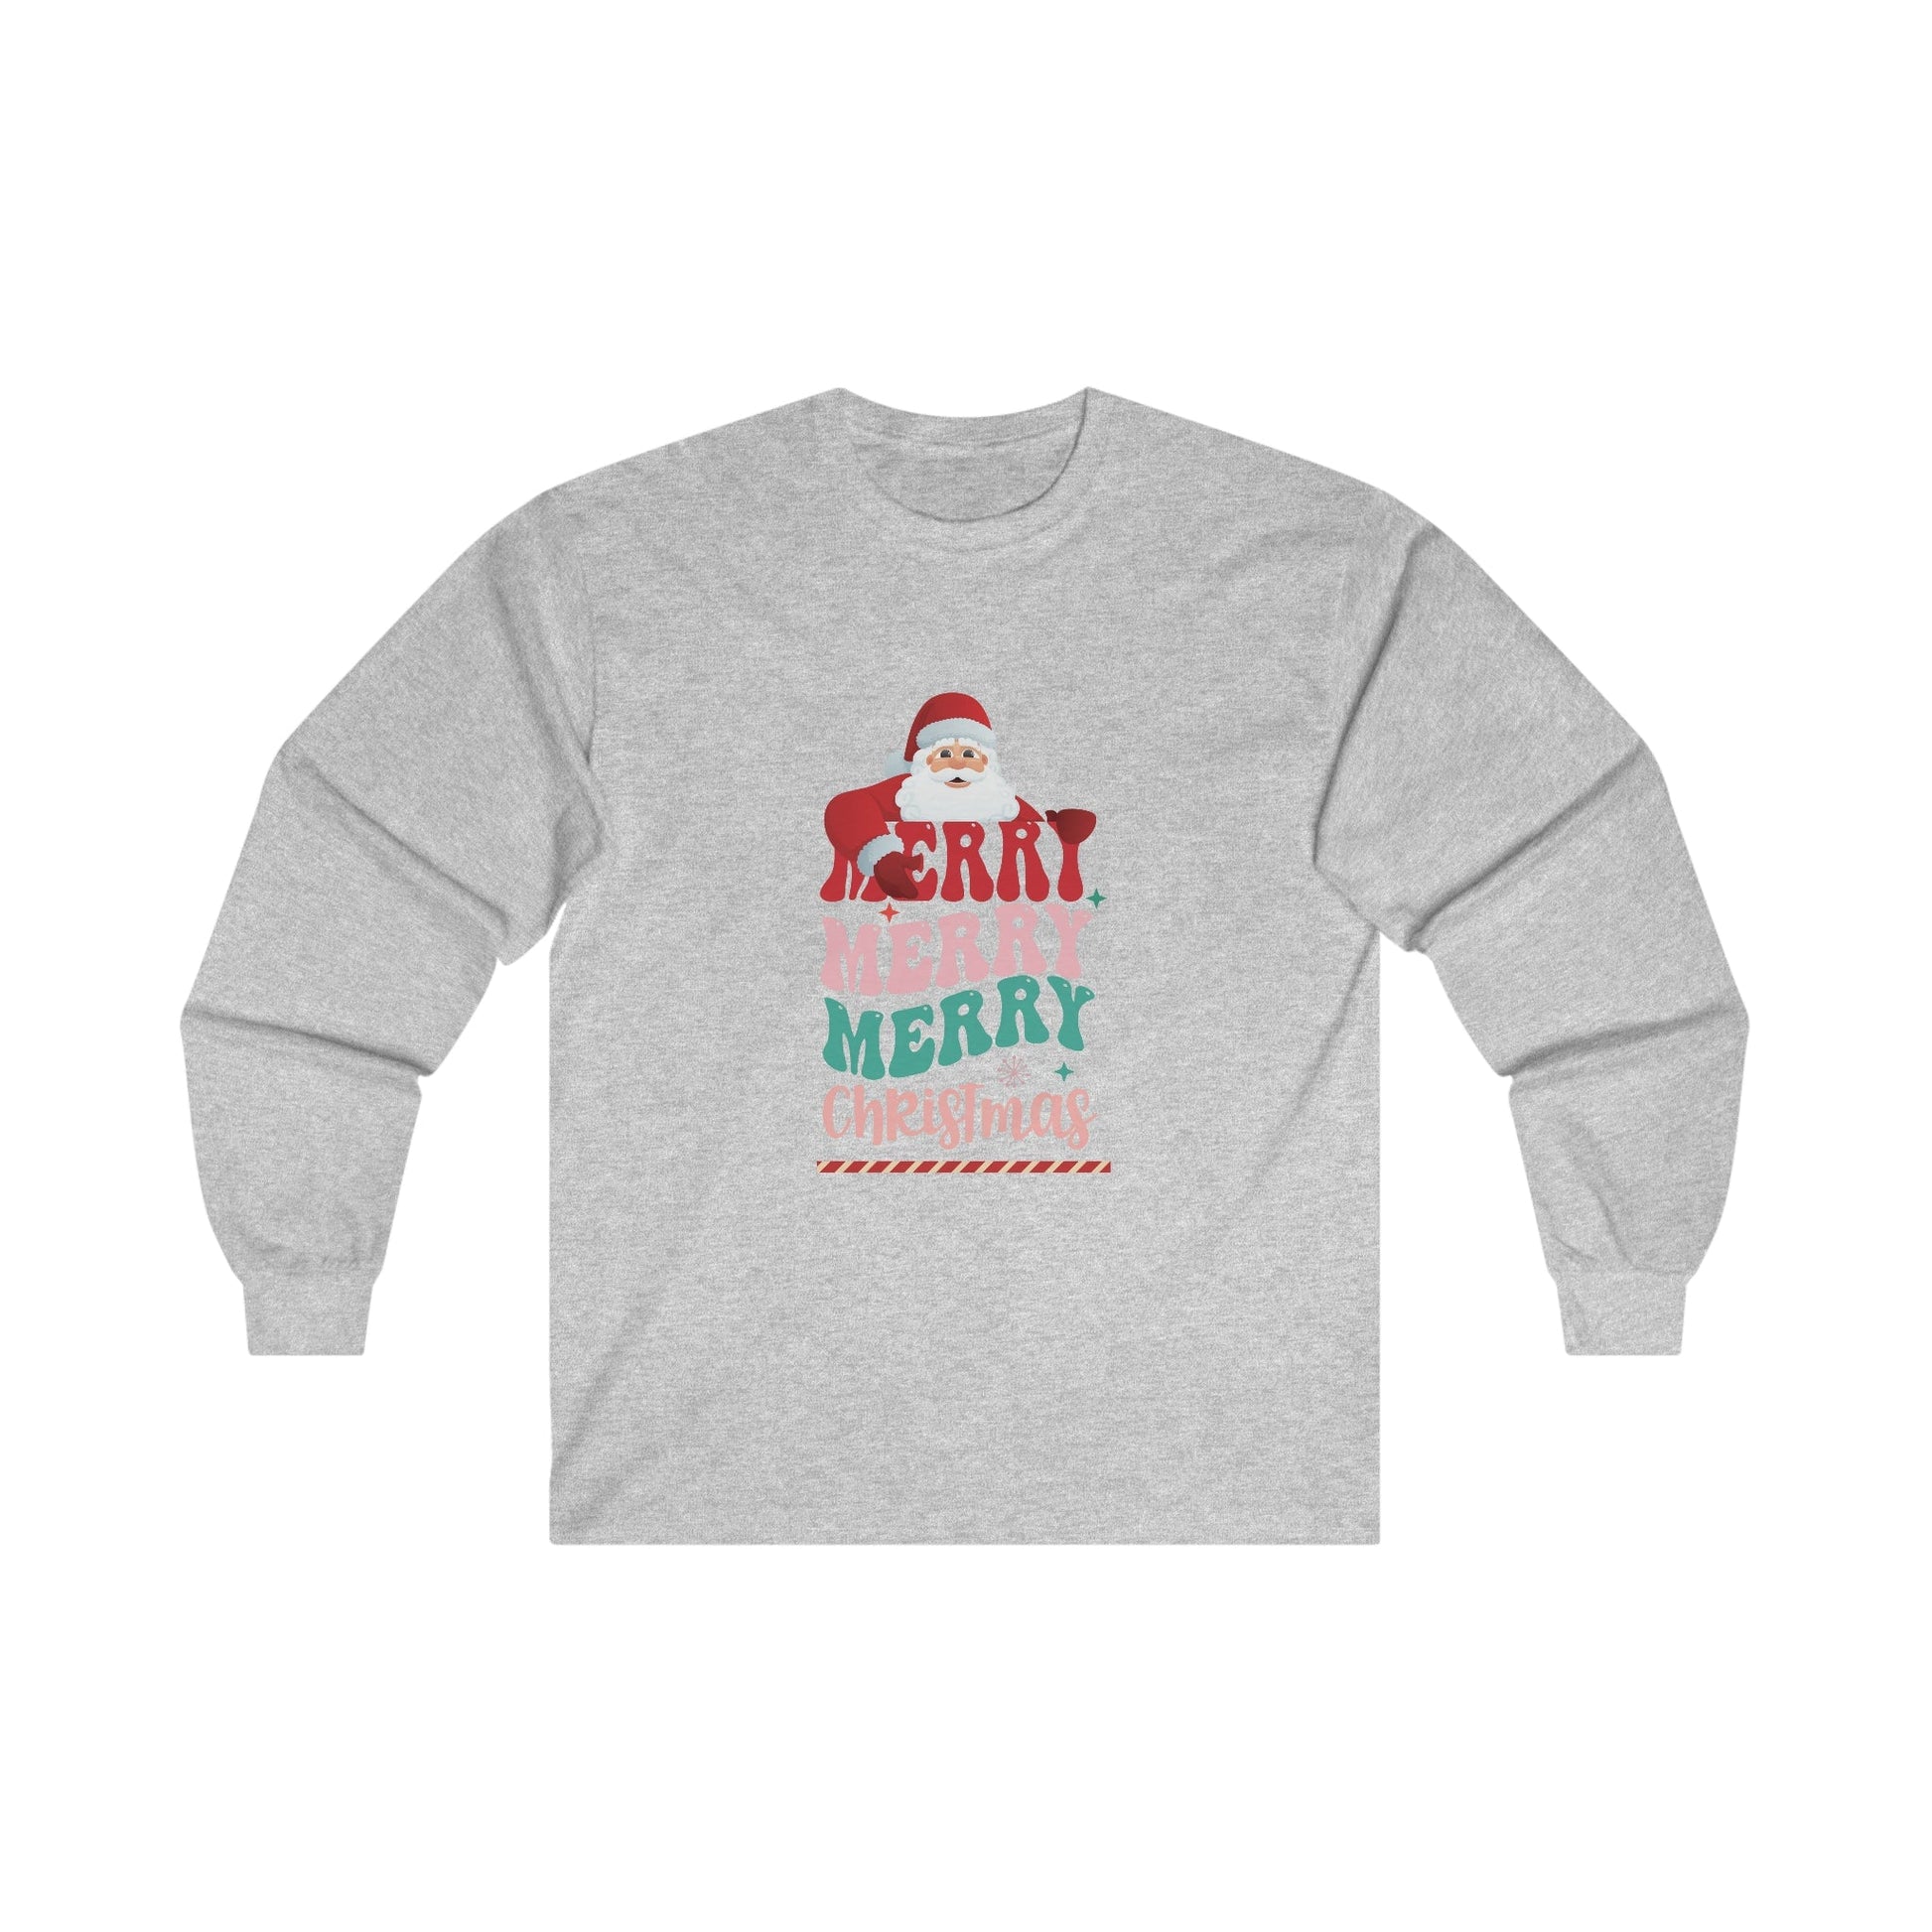 Christmas Long Sleeve T-Shirt - Merry Merry Merry Christmas - Cute Christmas Shirts - Youth and Adult Christmas Long Sleeve TShirts Long Sleeve T-Shirts Graphic Avenue Light Gray Adult Small 